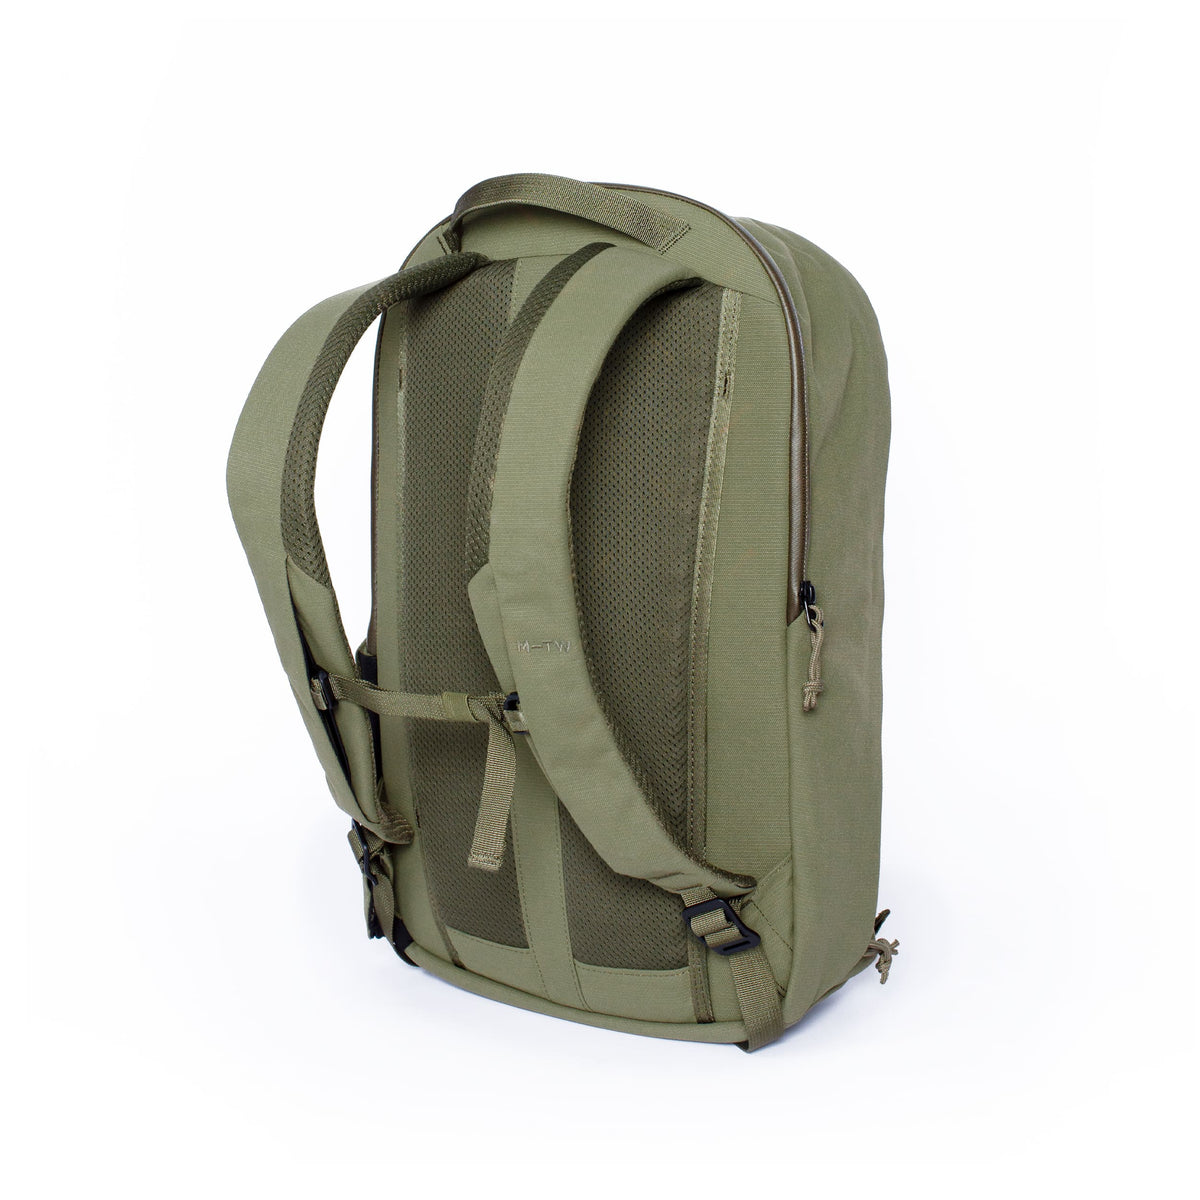 Moment Everything Backpack (Workwear, 21L) 106-192 B&H Photo